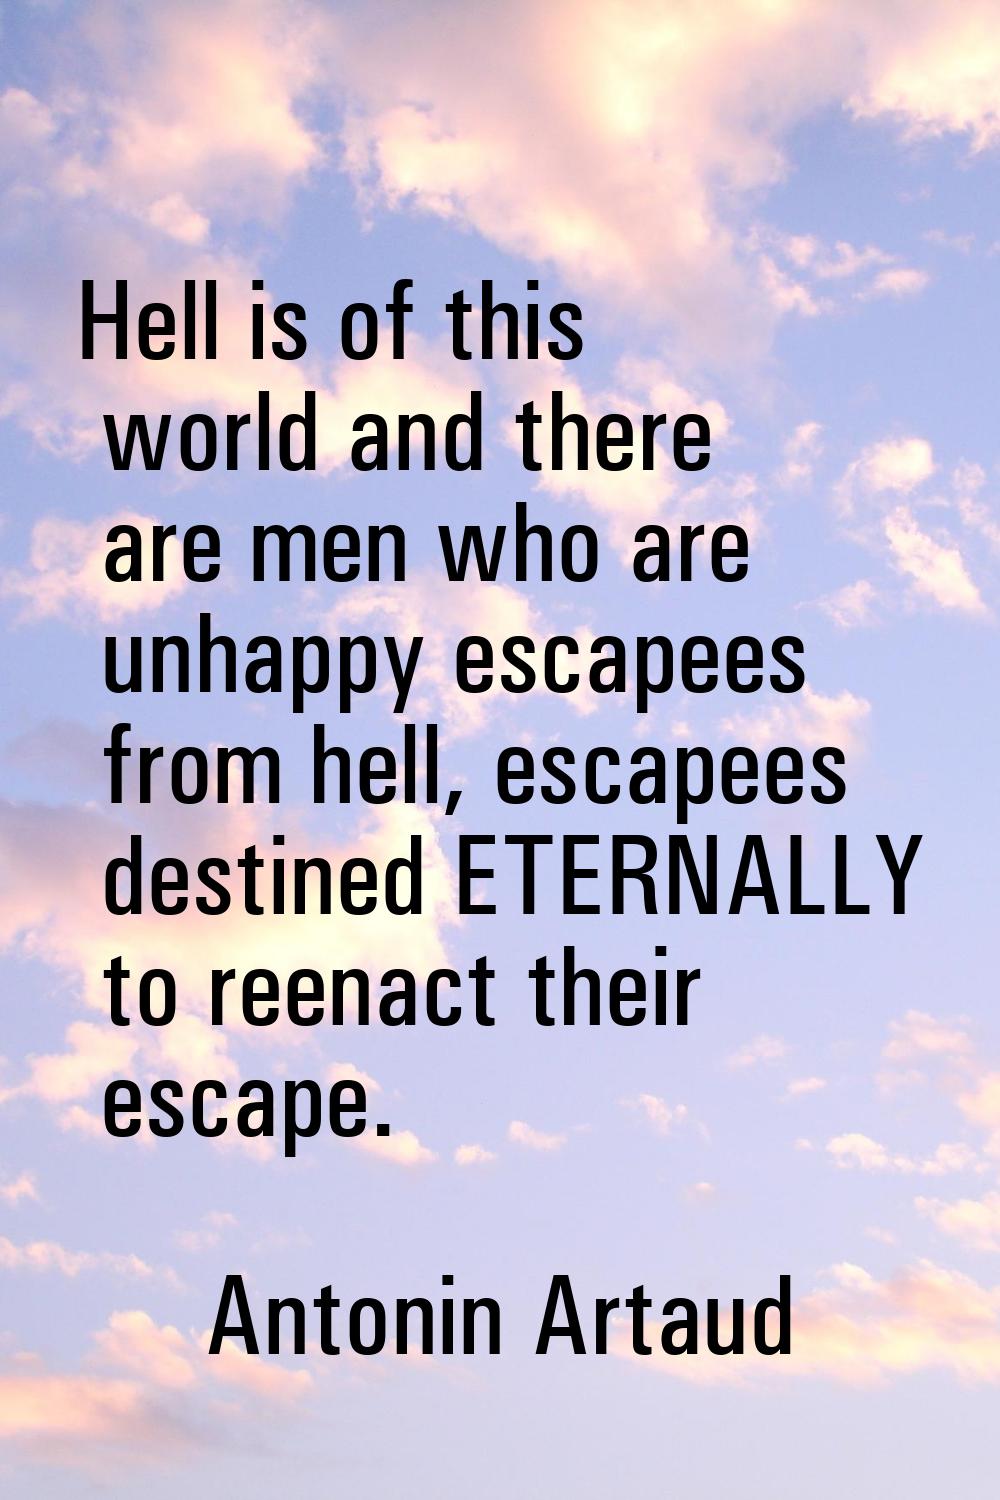 Hell is of this world and there are men who are unhappy escapees from hell, escapees destined ETERN